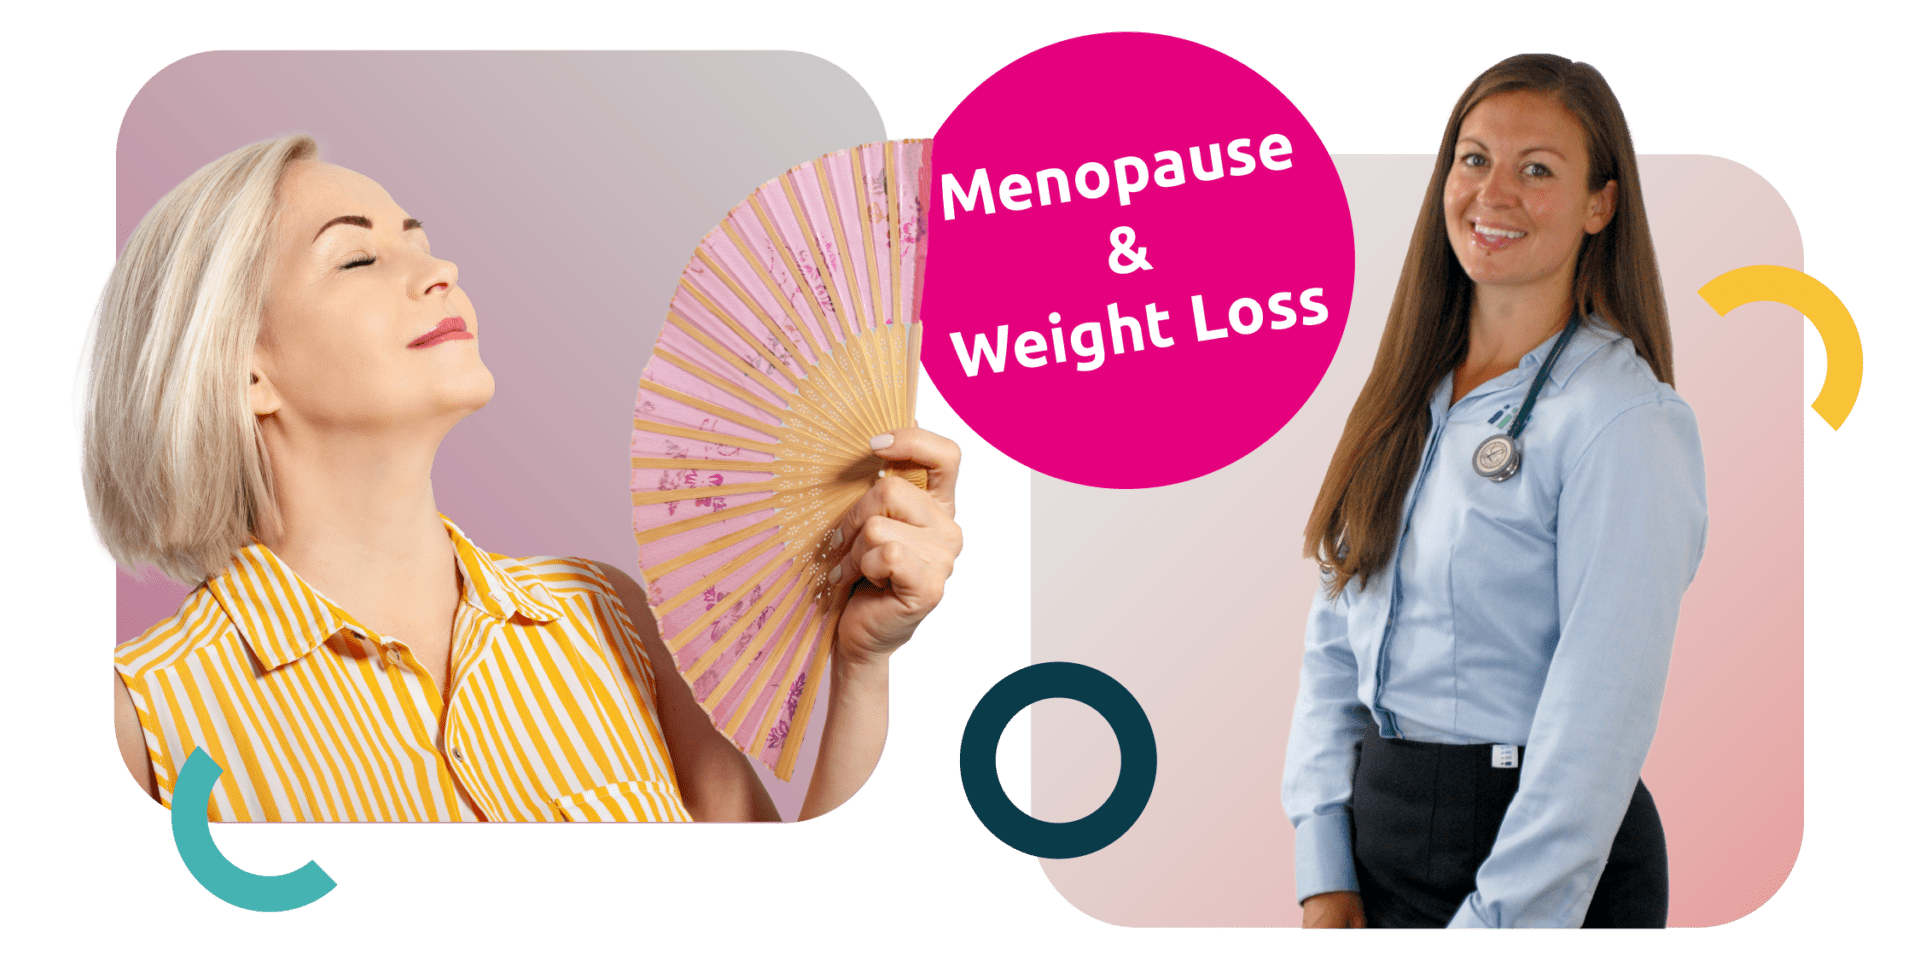 Menopause Weight Loss: Expert Help - The Slimming Clinic